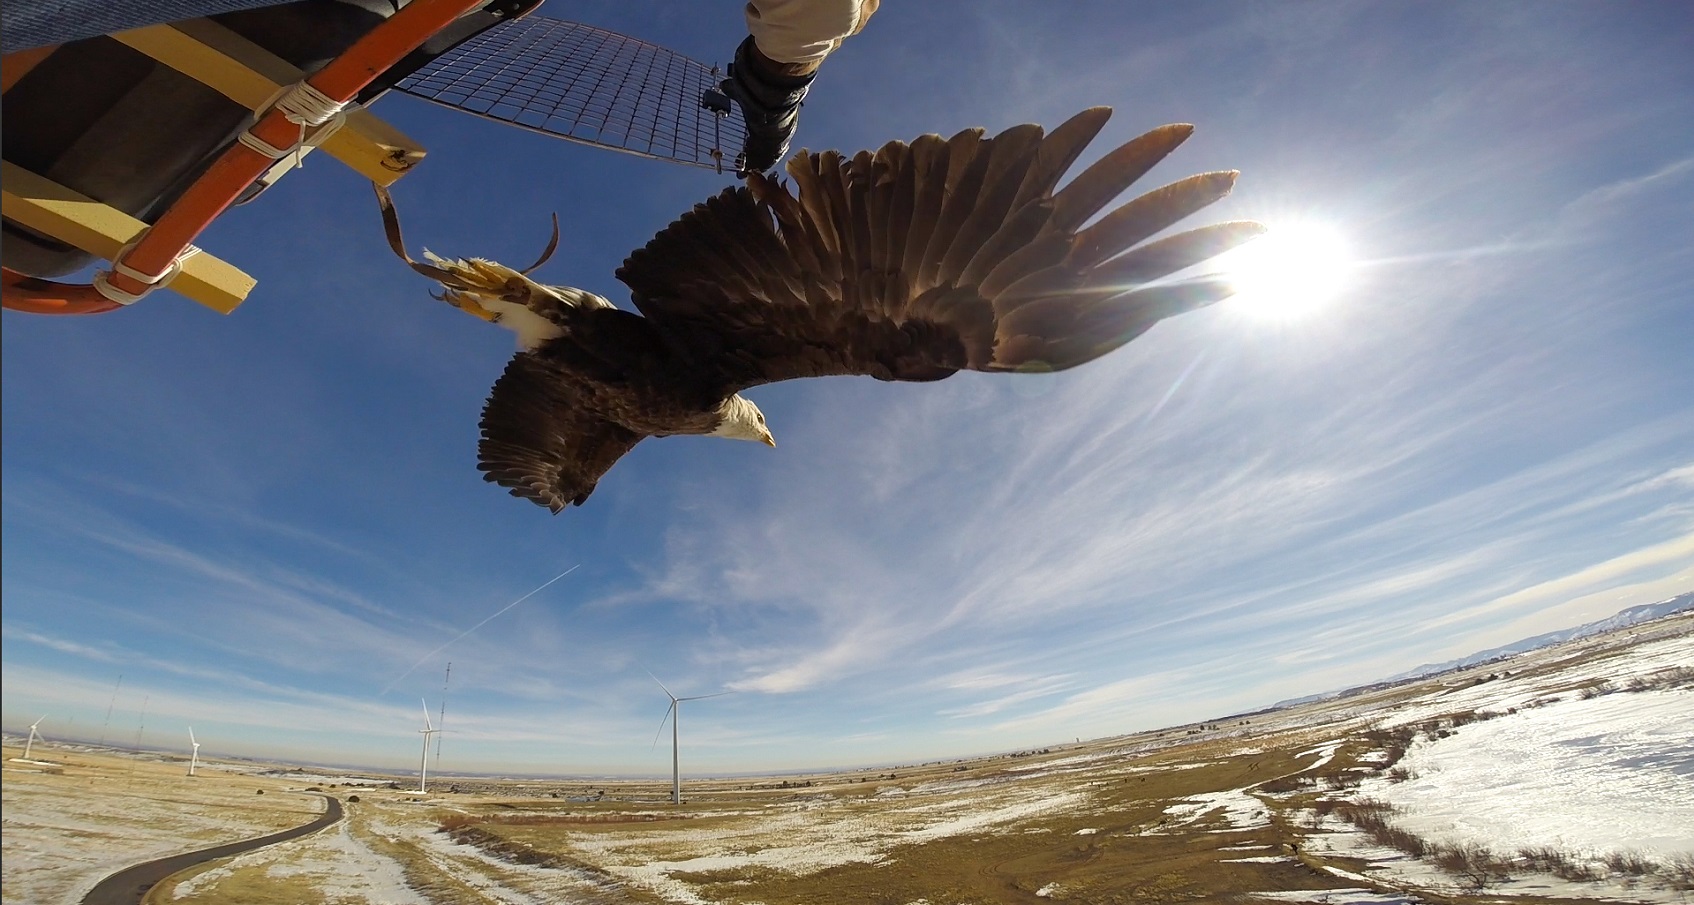 A photo of an eagle flying after being released from a kennel.